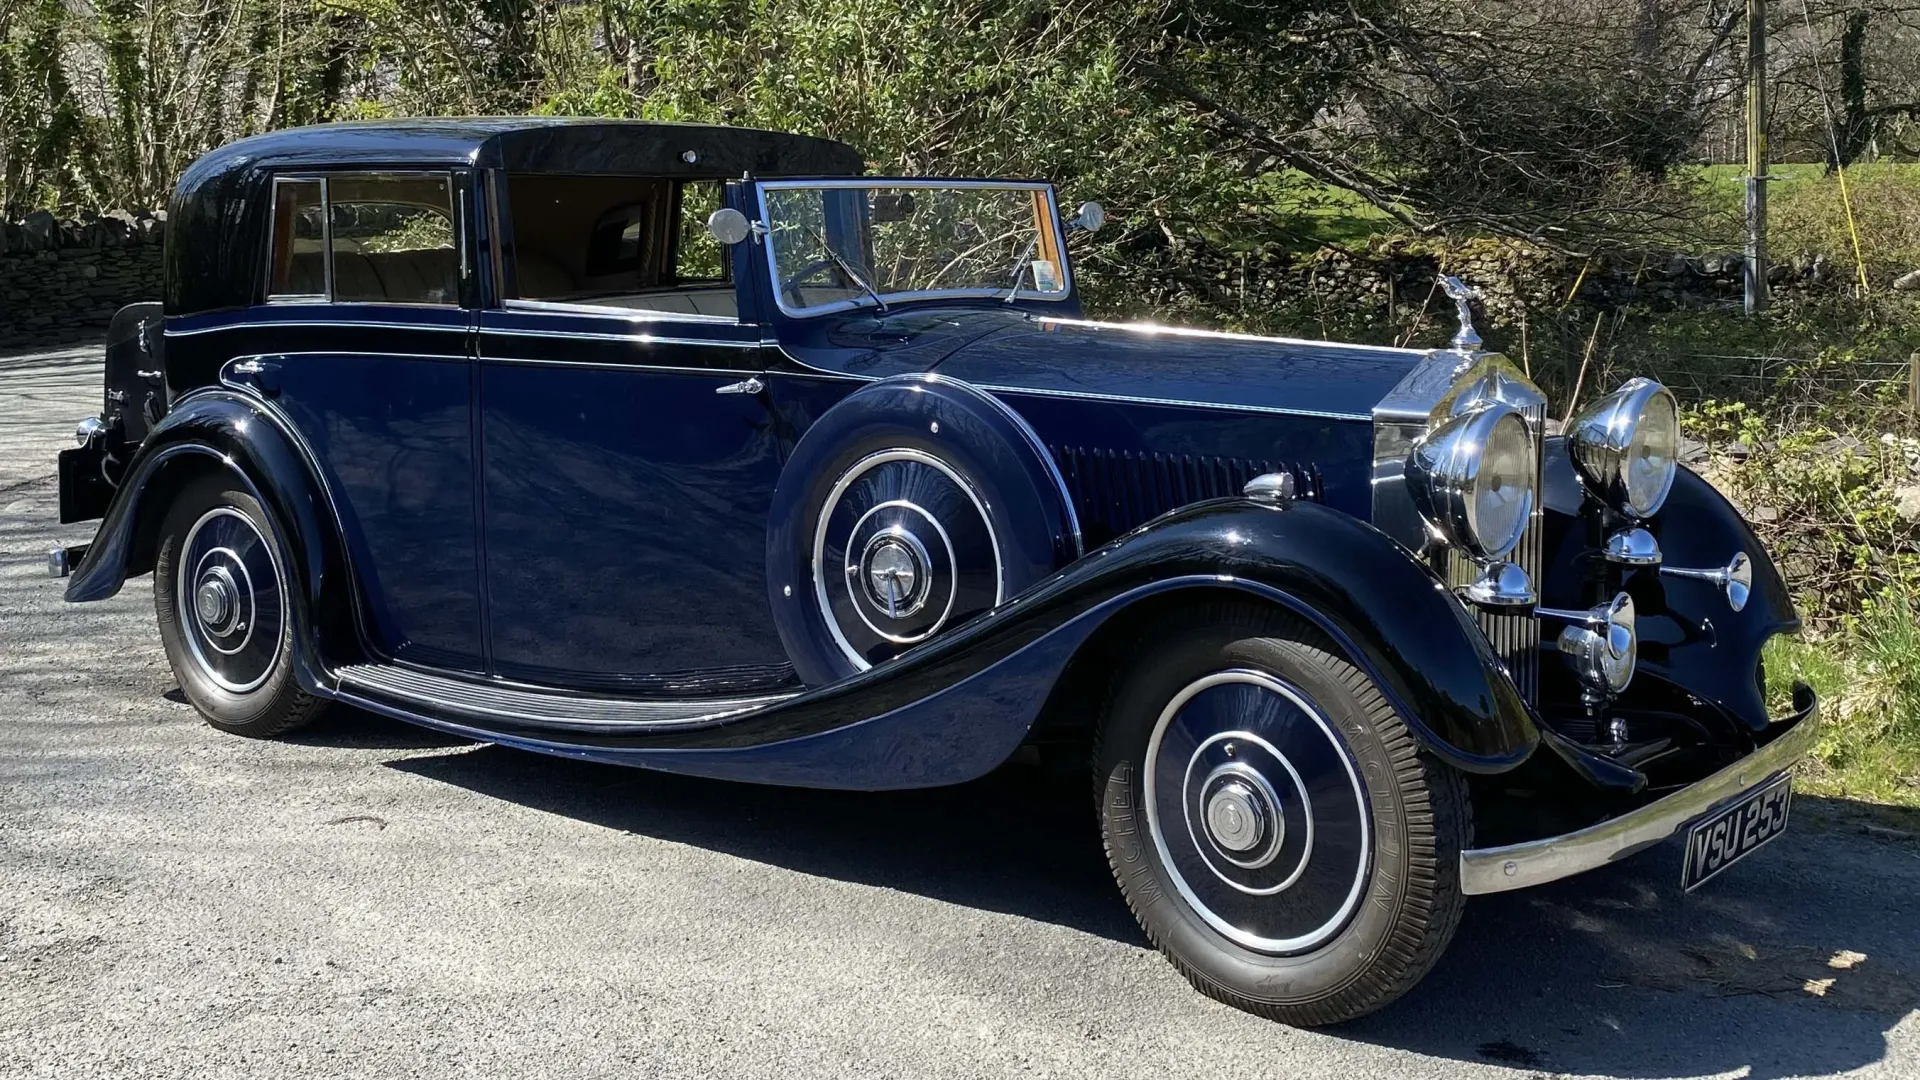 Right Side view of Vintage Rolls-Royce Sedanca de Ville in Blue showing the mounted spare wheel on car's skirt